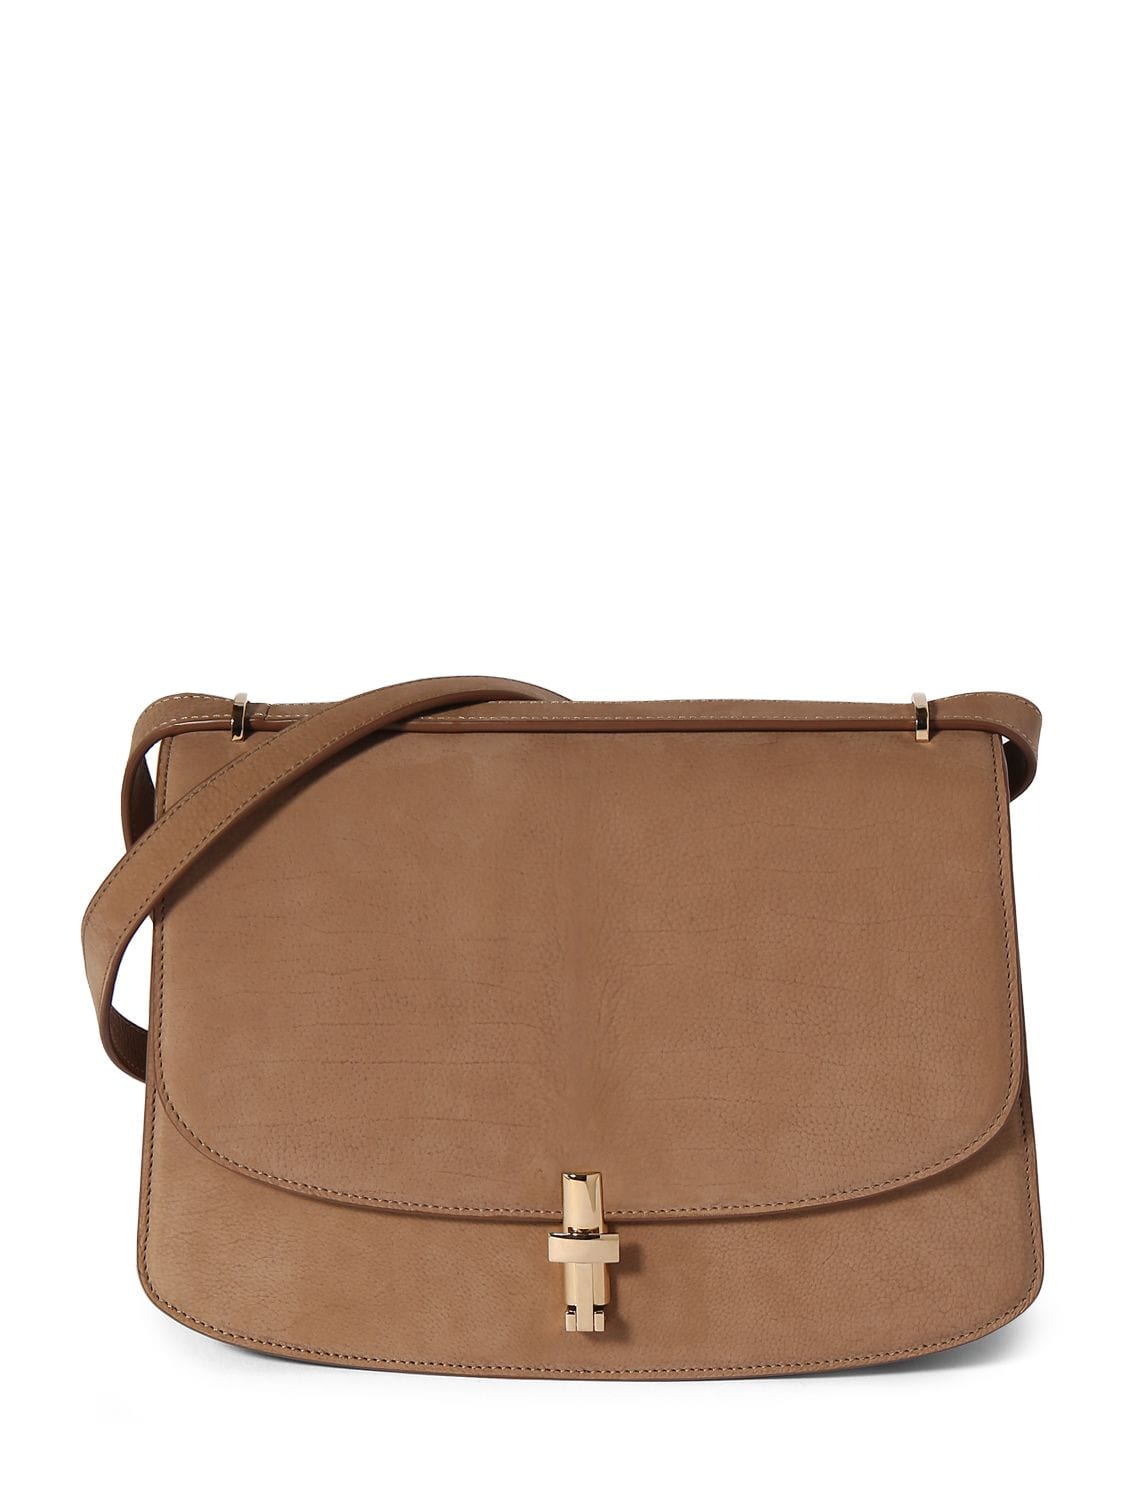 The Row Sofia 10 Suede Shoulder Bag In Tundra Lg